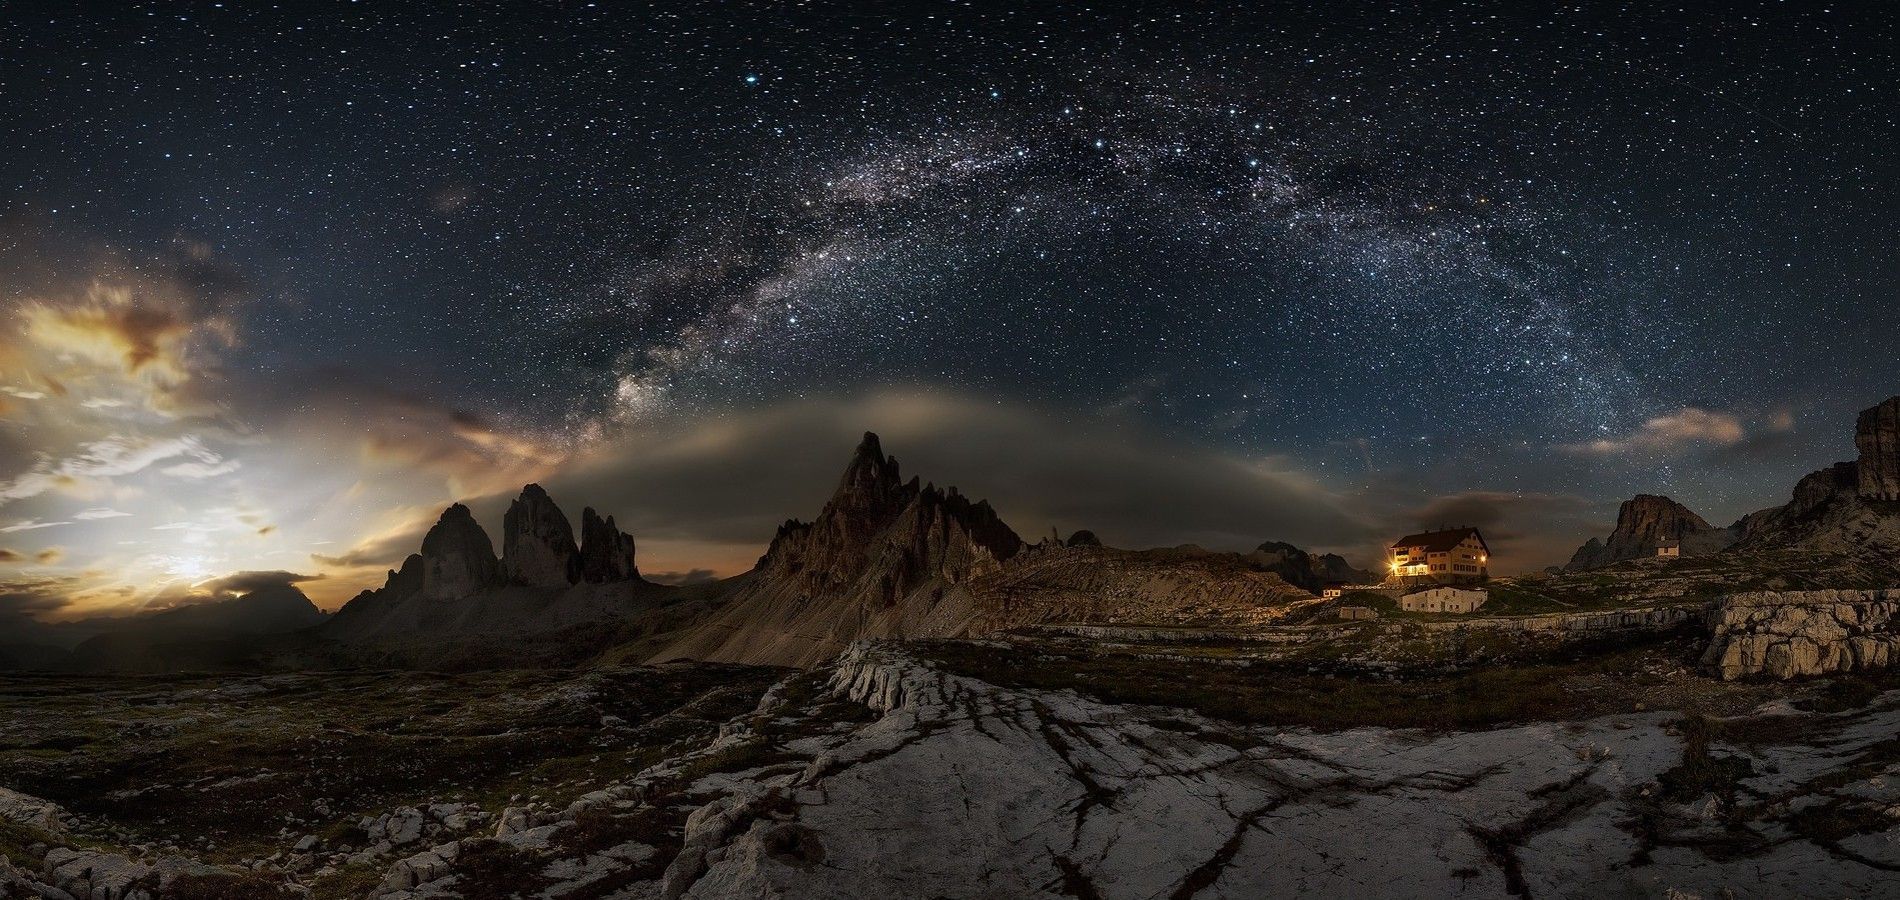 nature, Landscape, Photography, Panoramas, Milky Way, Dolomites (mountains), Starry Night, Summer, Galaxy, Building, Cabin, Lights, Long Exposure, Italy Wallpap